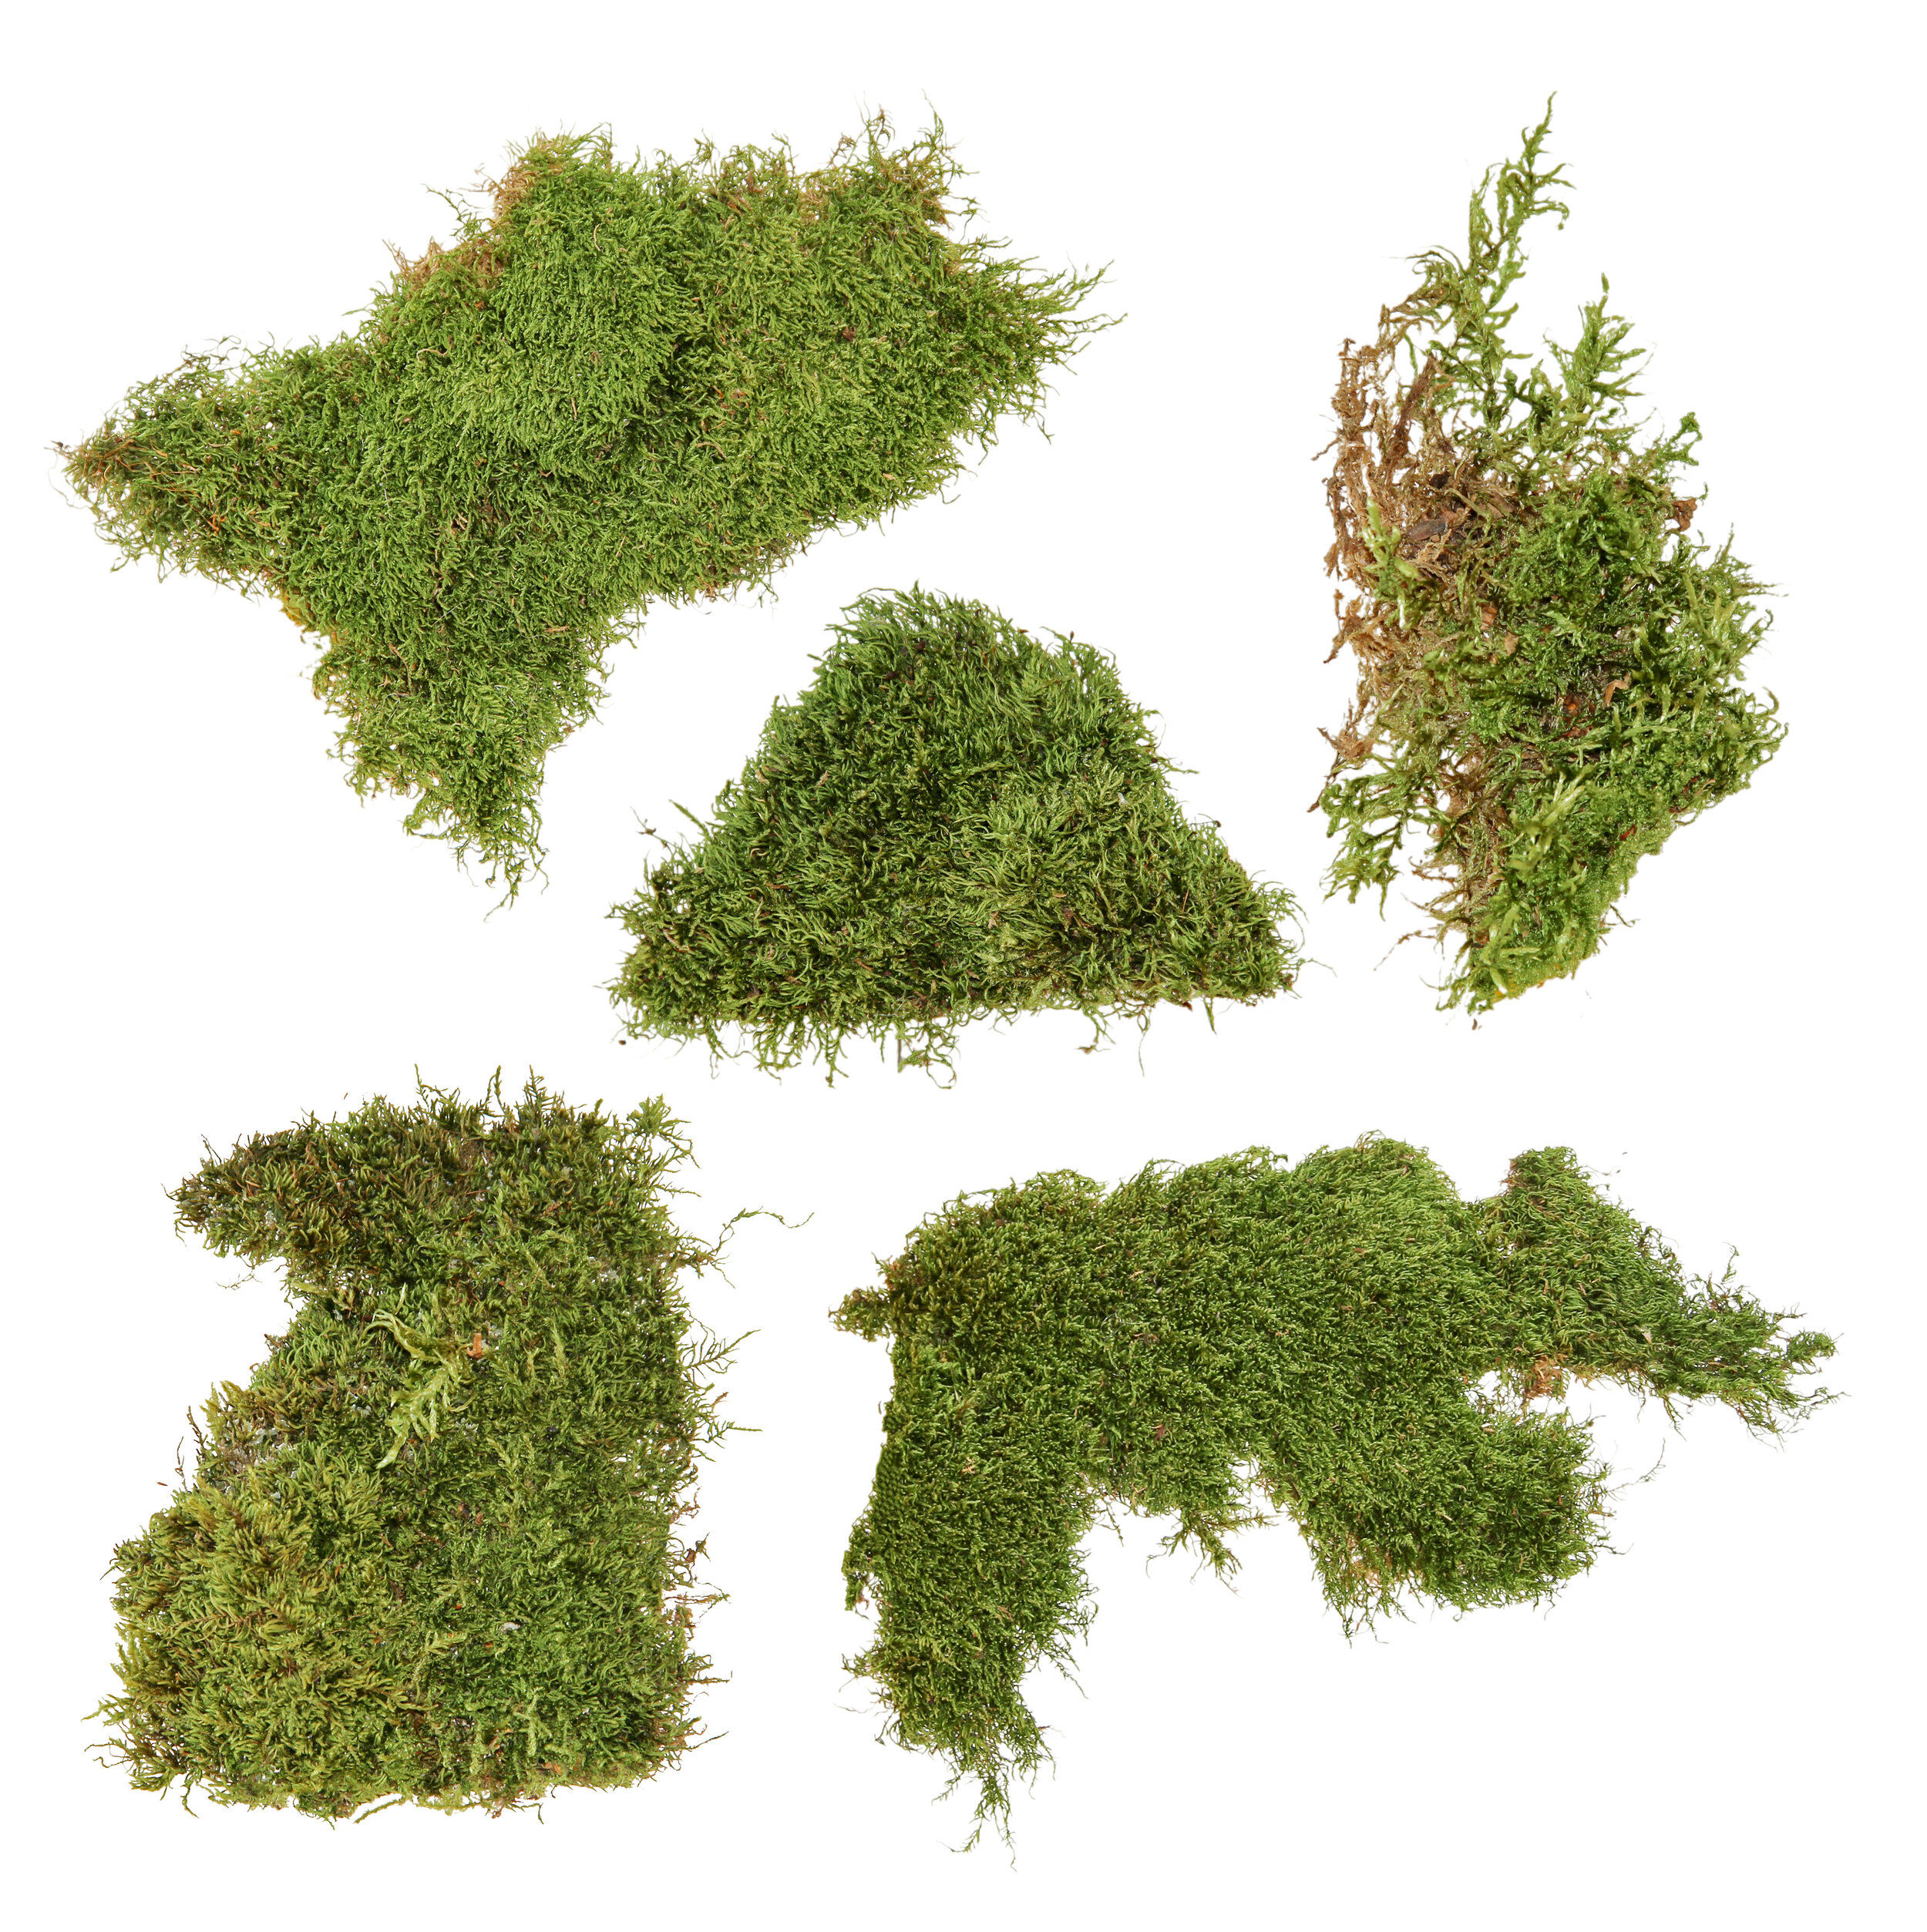 Moss patches.jpg